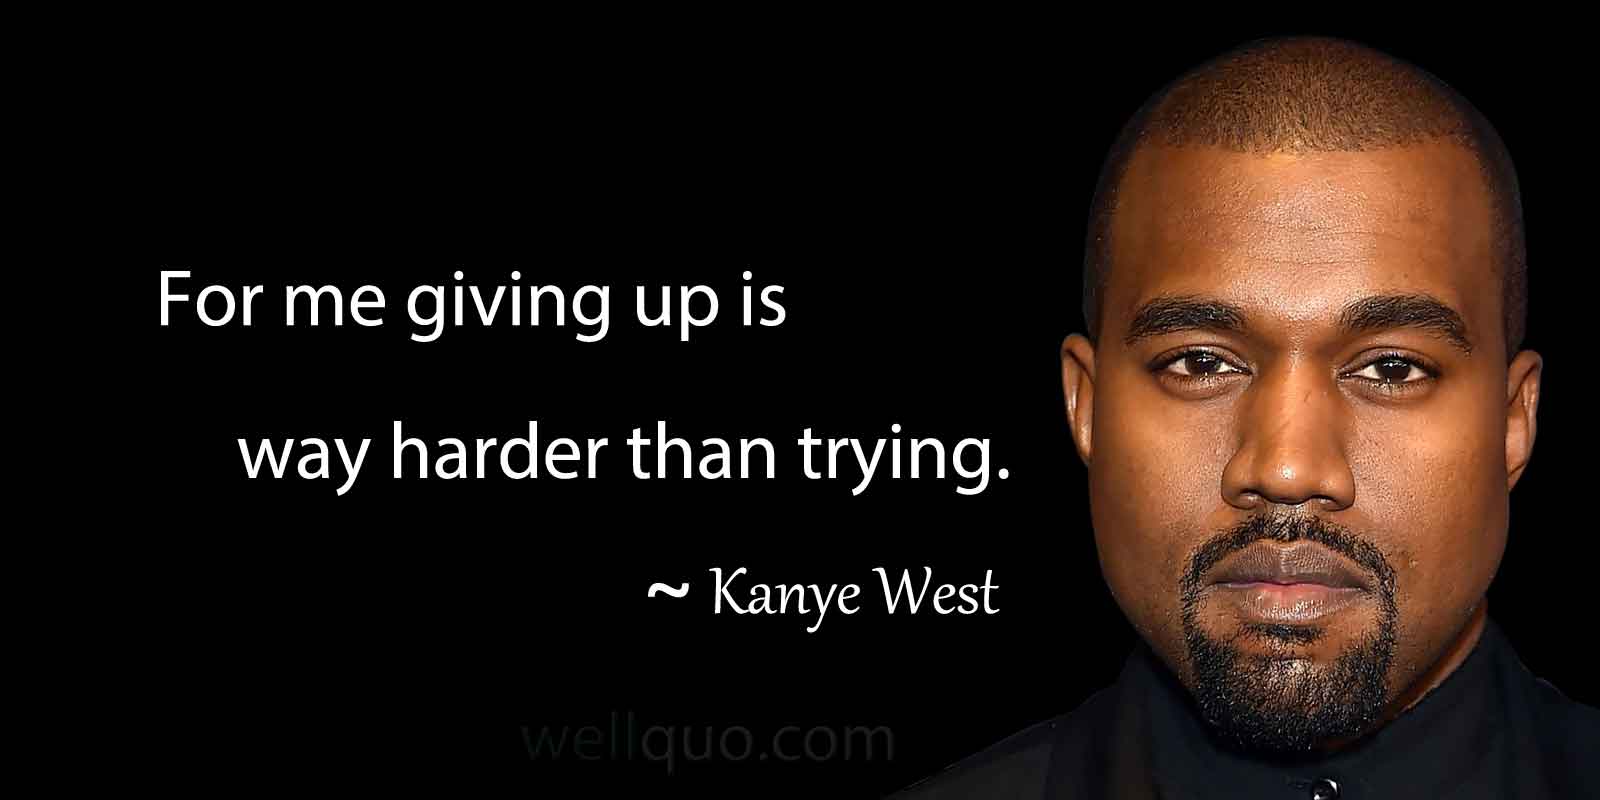 Inspirational Kanye West Quotes - Well Quo